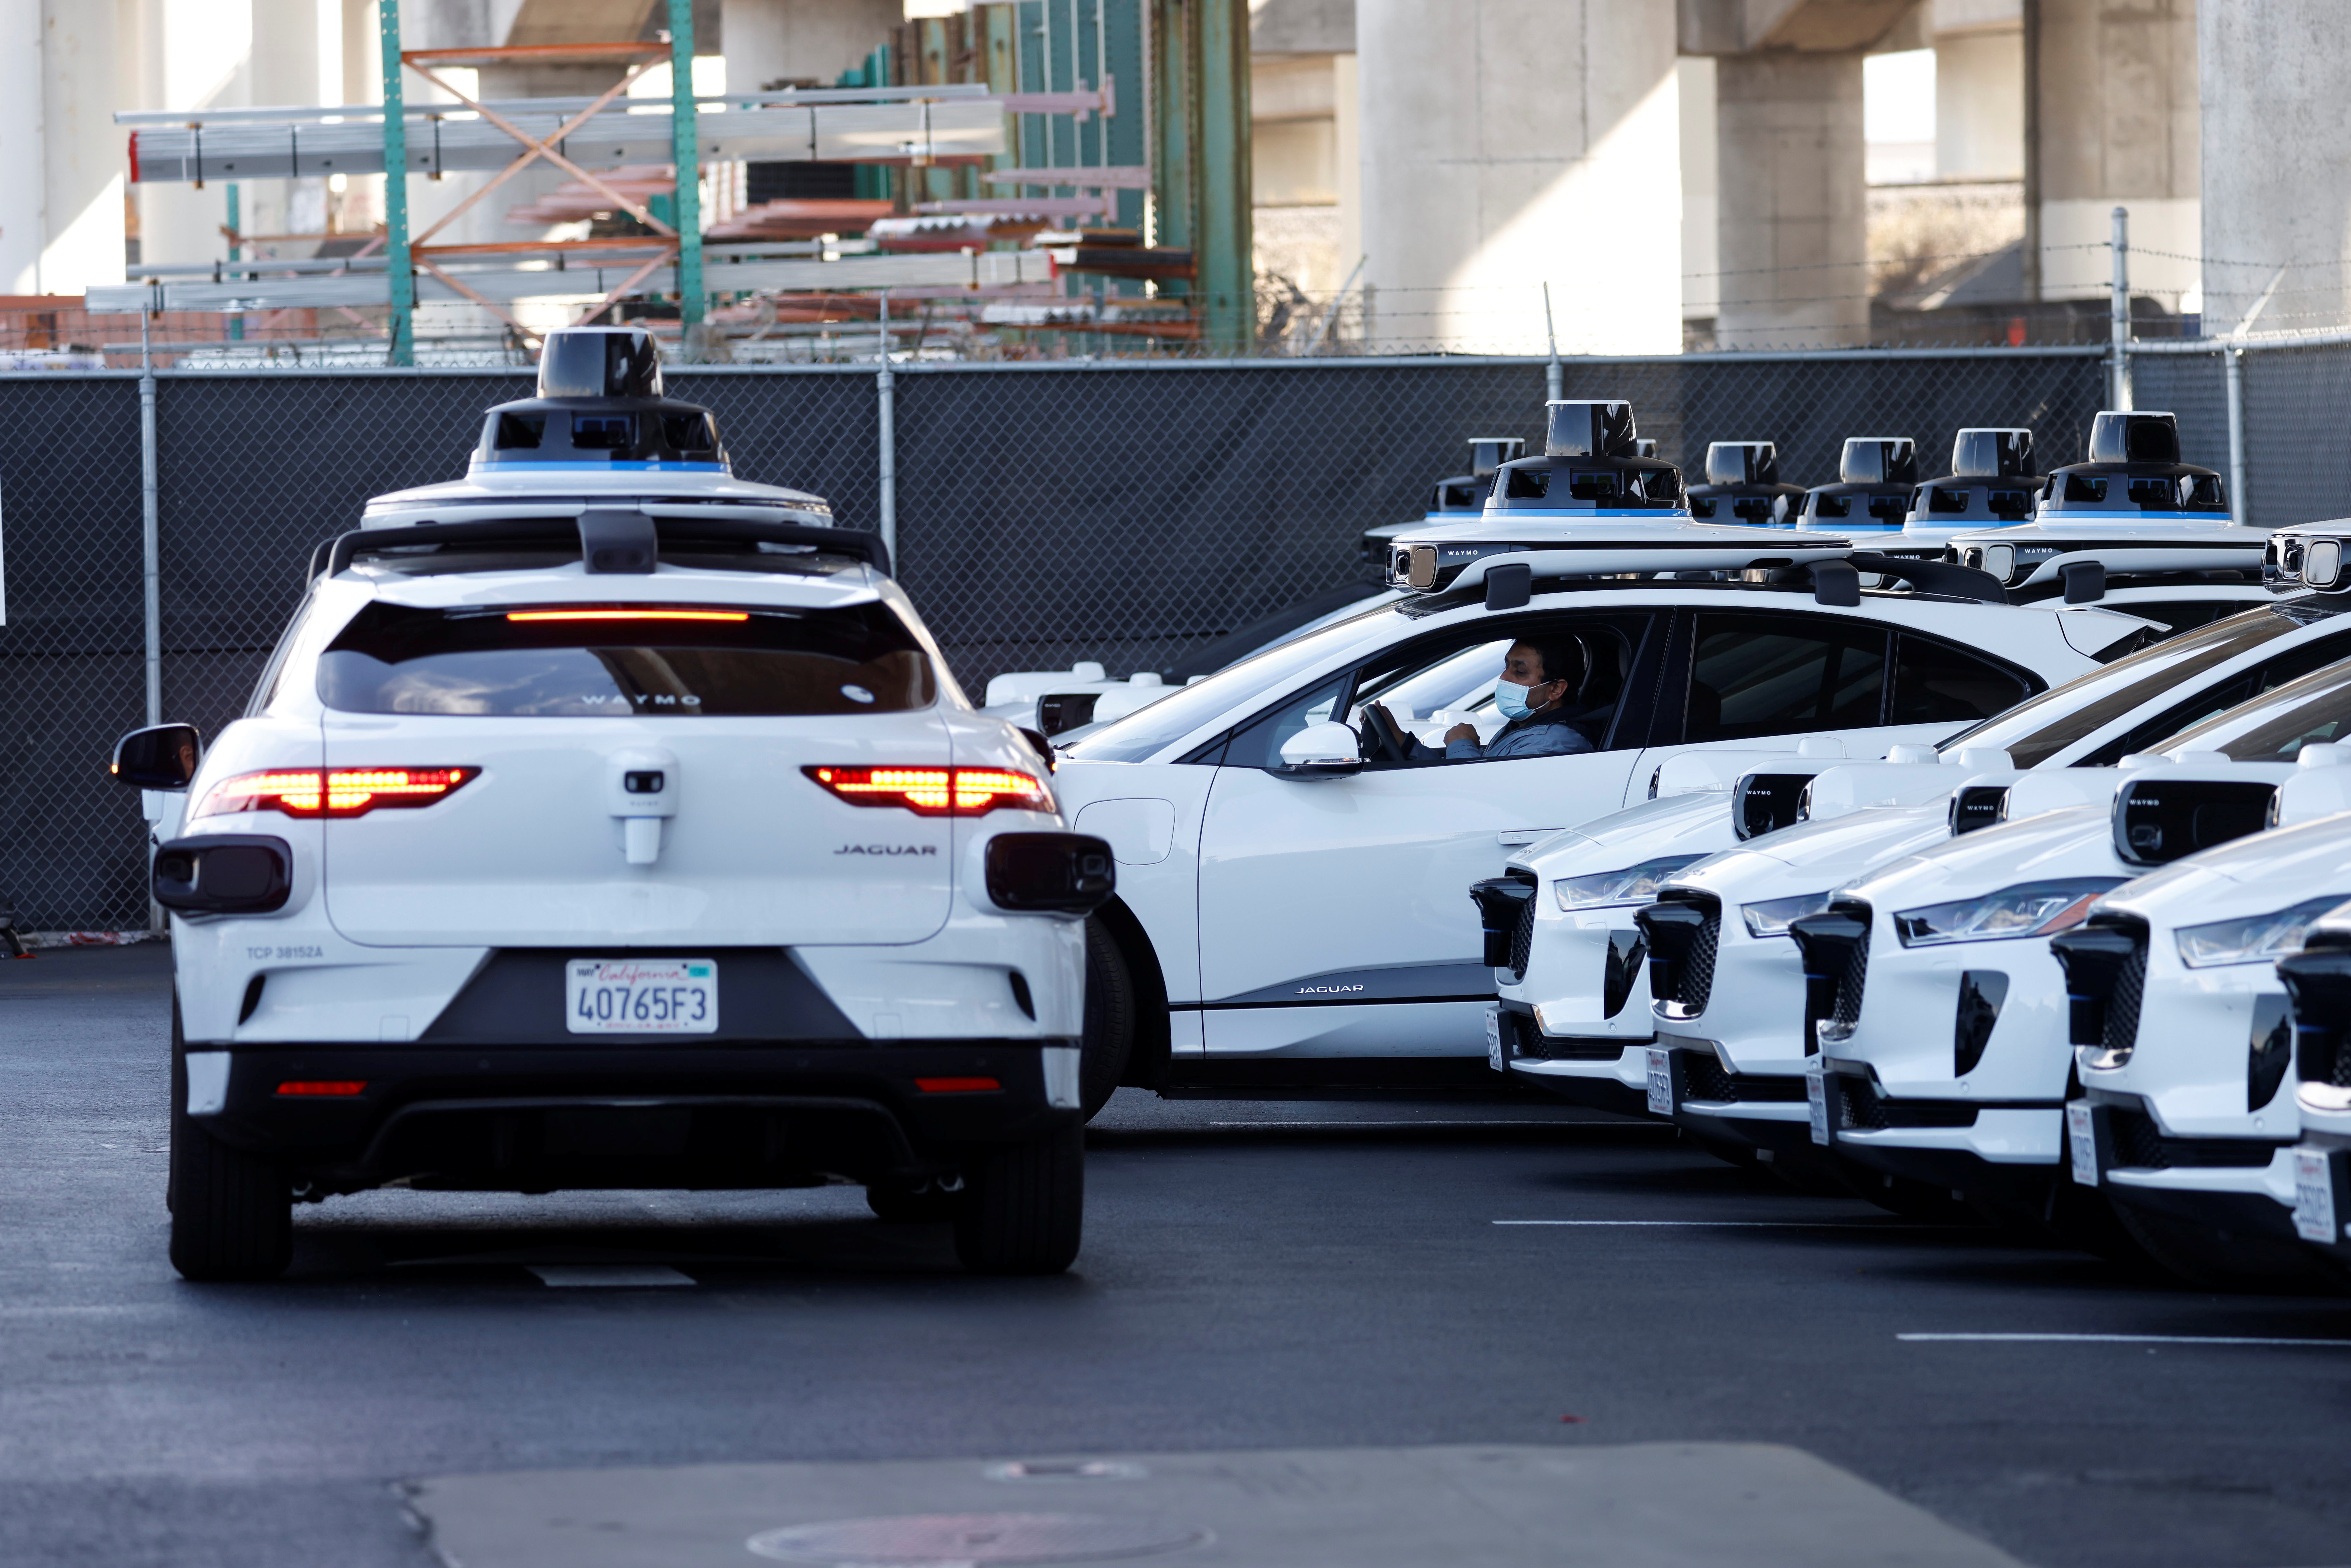 Jaguar I-Pace electric vehicles are tested at Waymo's operations center in San Francisco